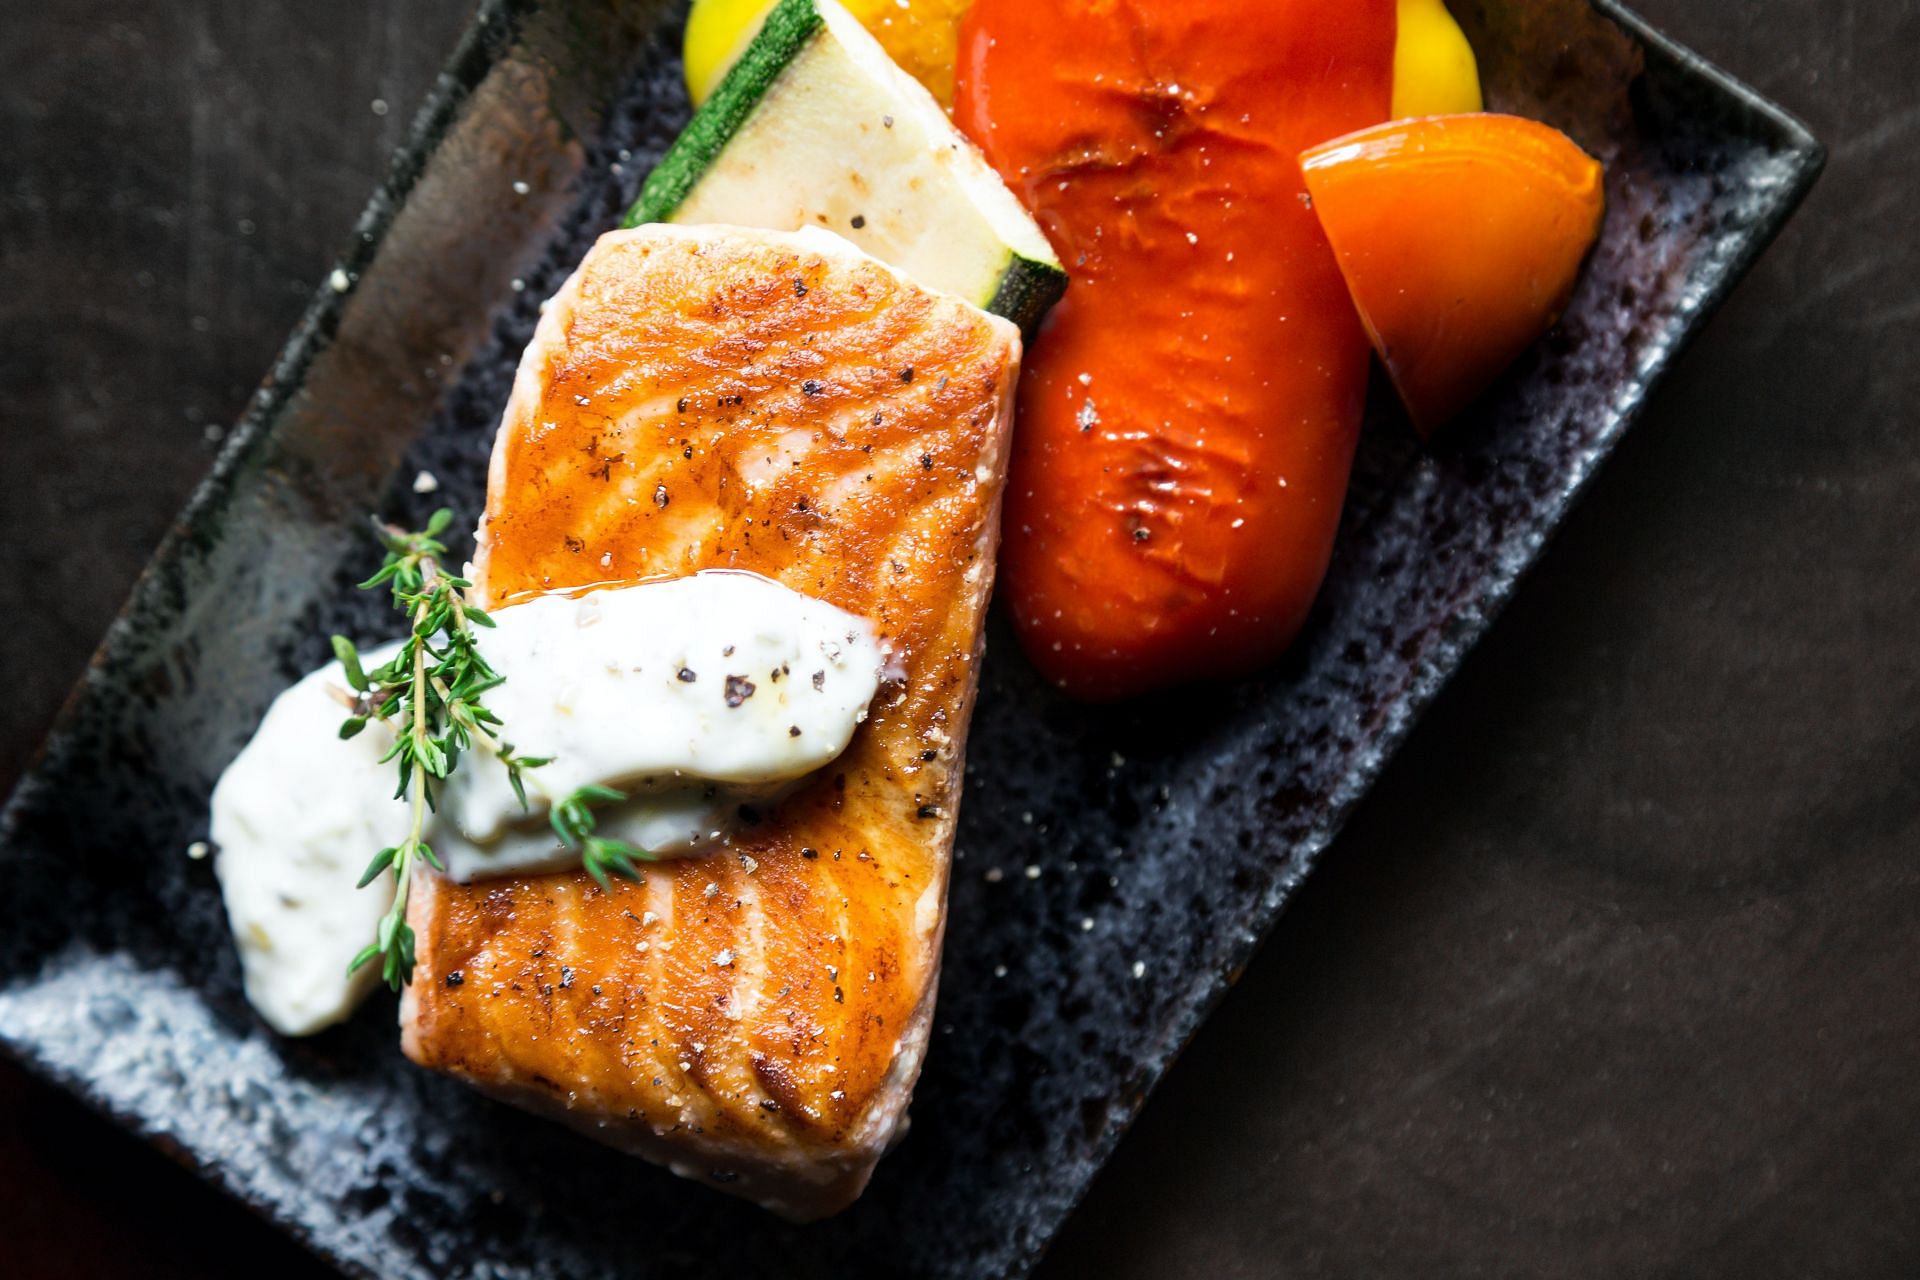 Salmon is rich in omega-3 and other nutrients. (Image via Pexels / Malidate Van)